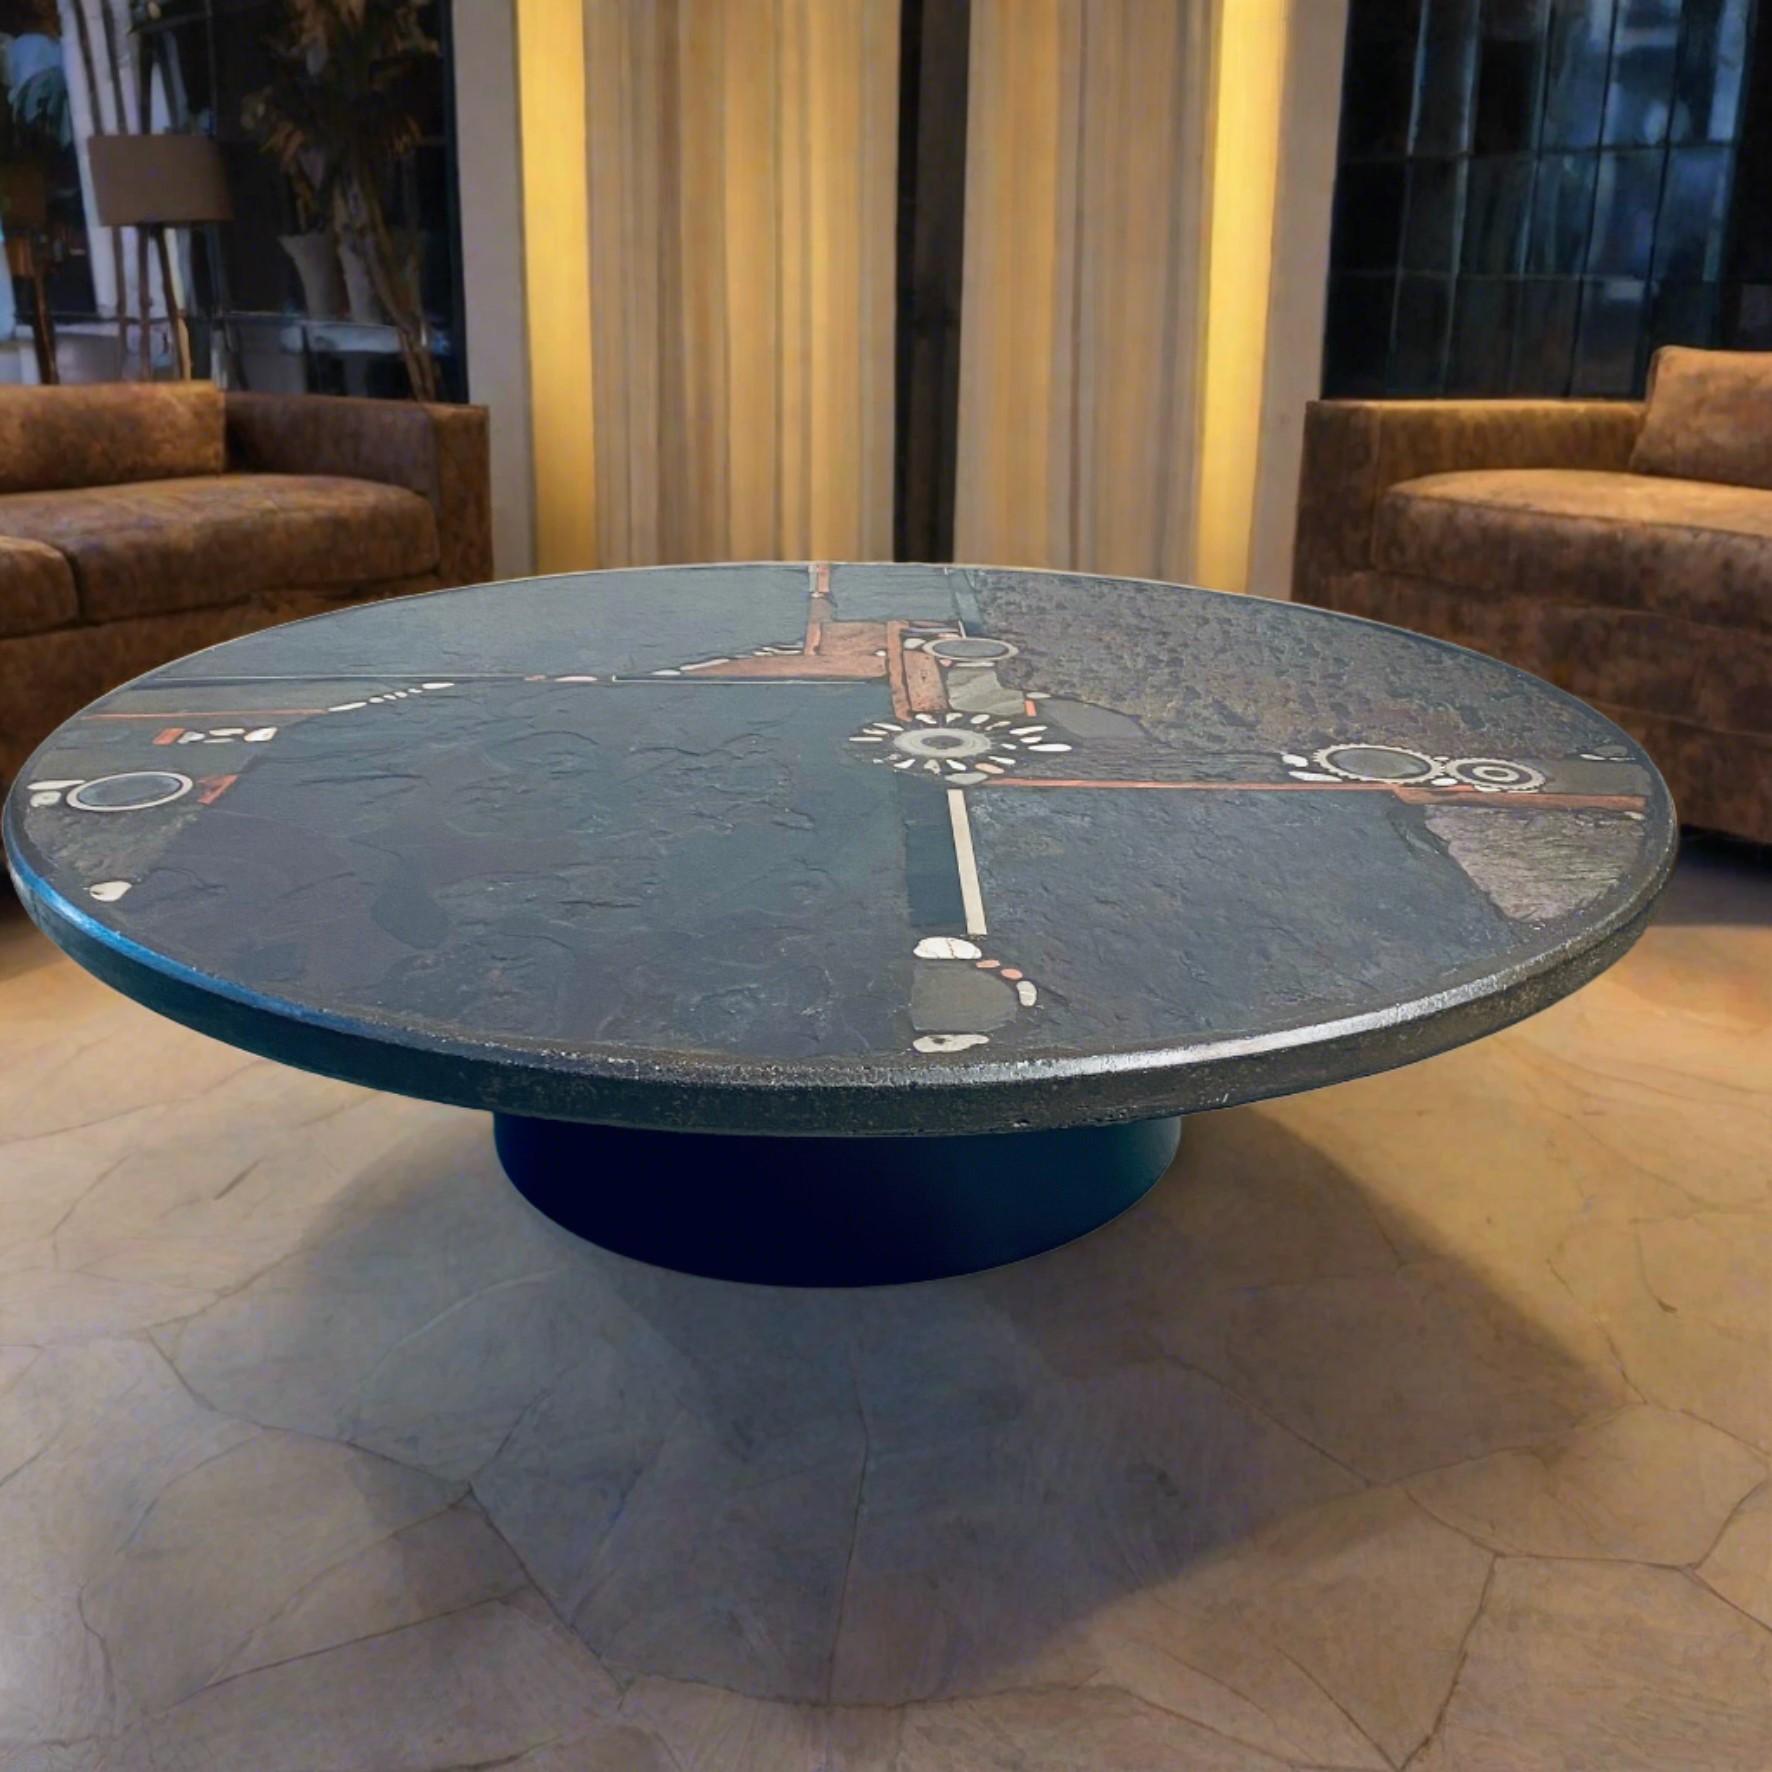 Mid-Century Modern Brutalist Round Coffee Table by Sculptor Paul Kingma, Netherlands, 1984